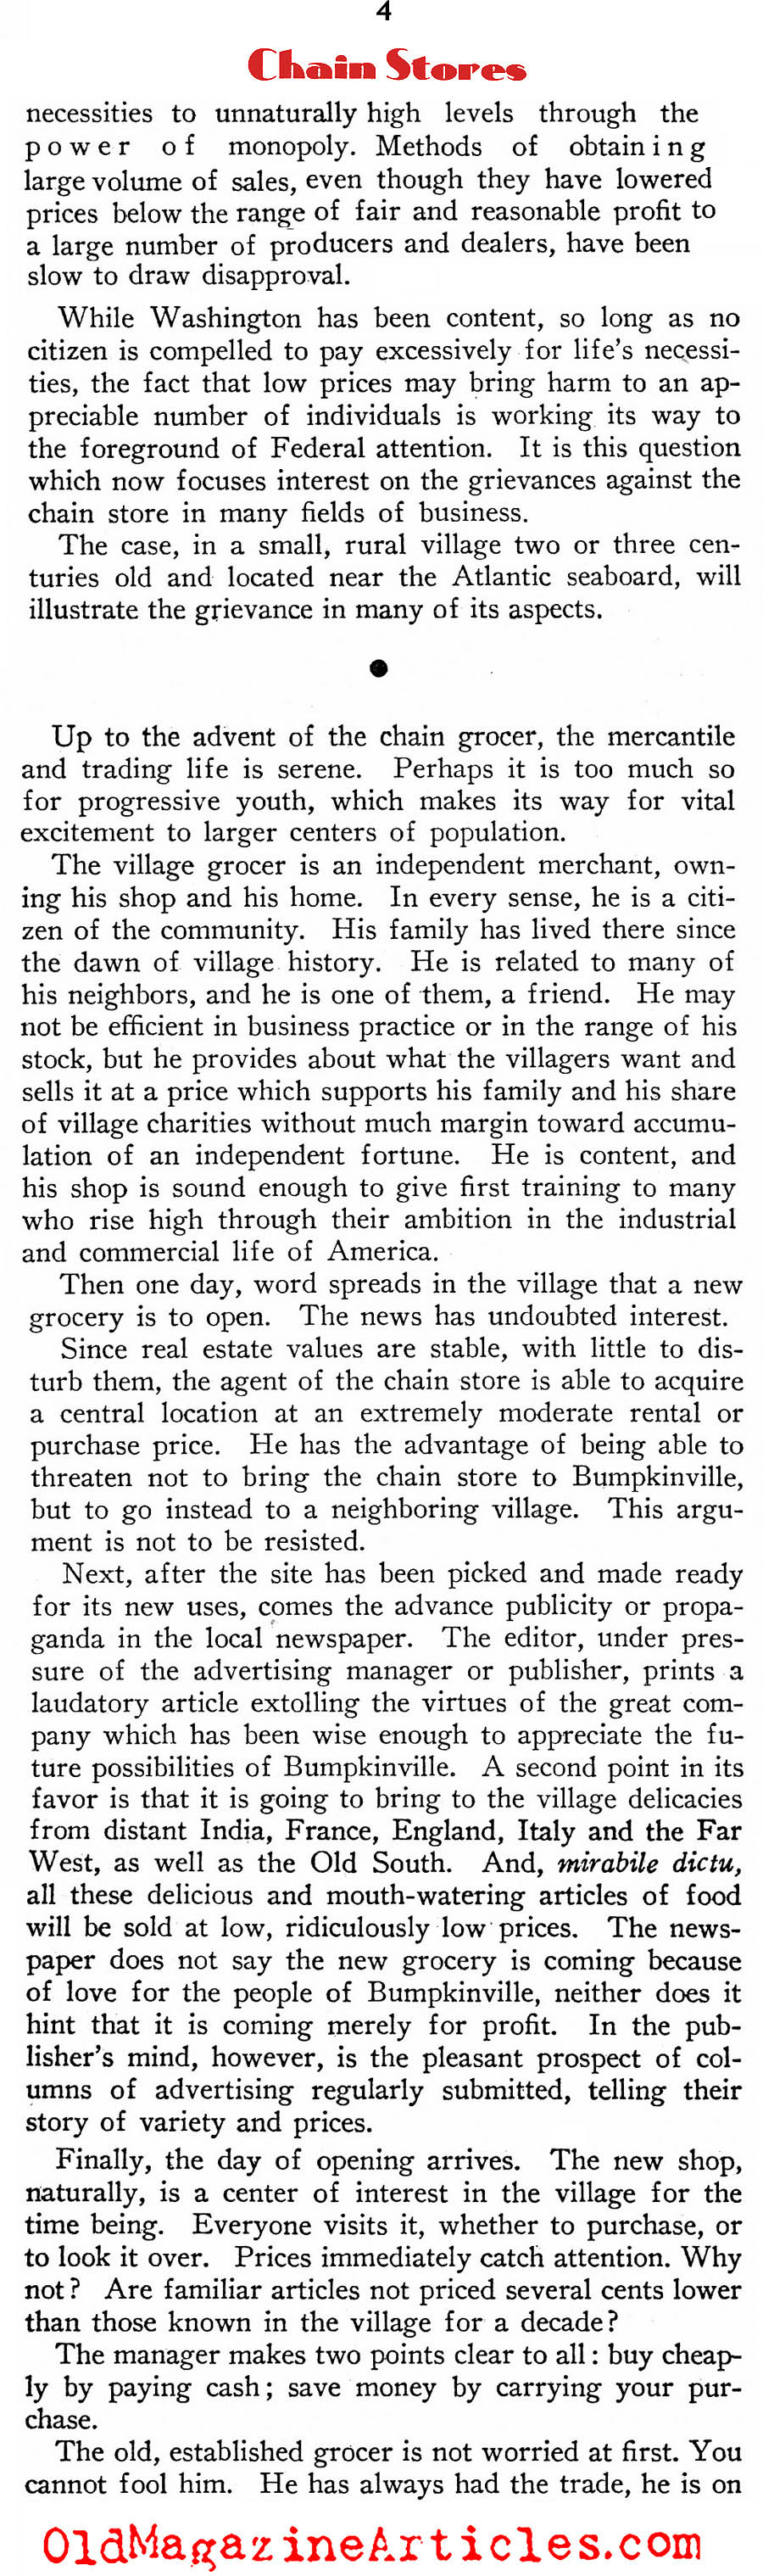 The Chain Store Problem (New Outlook Magazine, 1933)